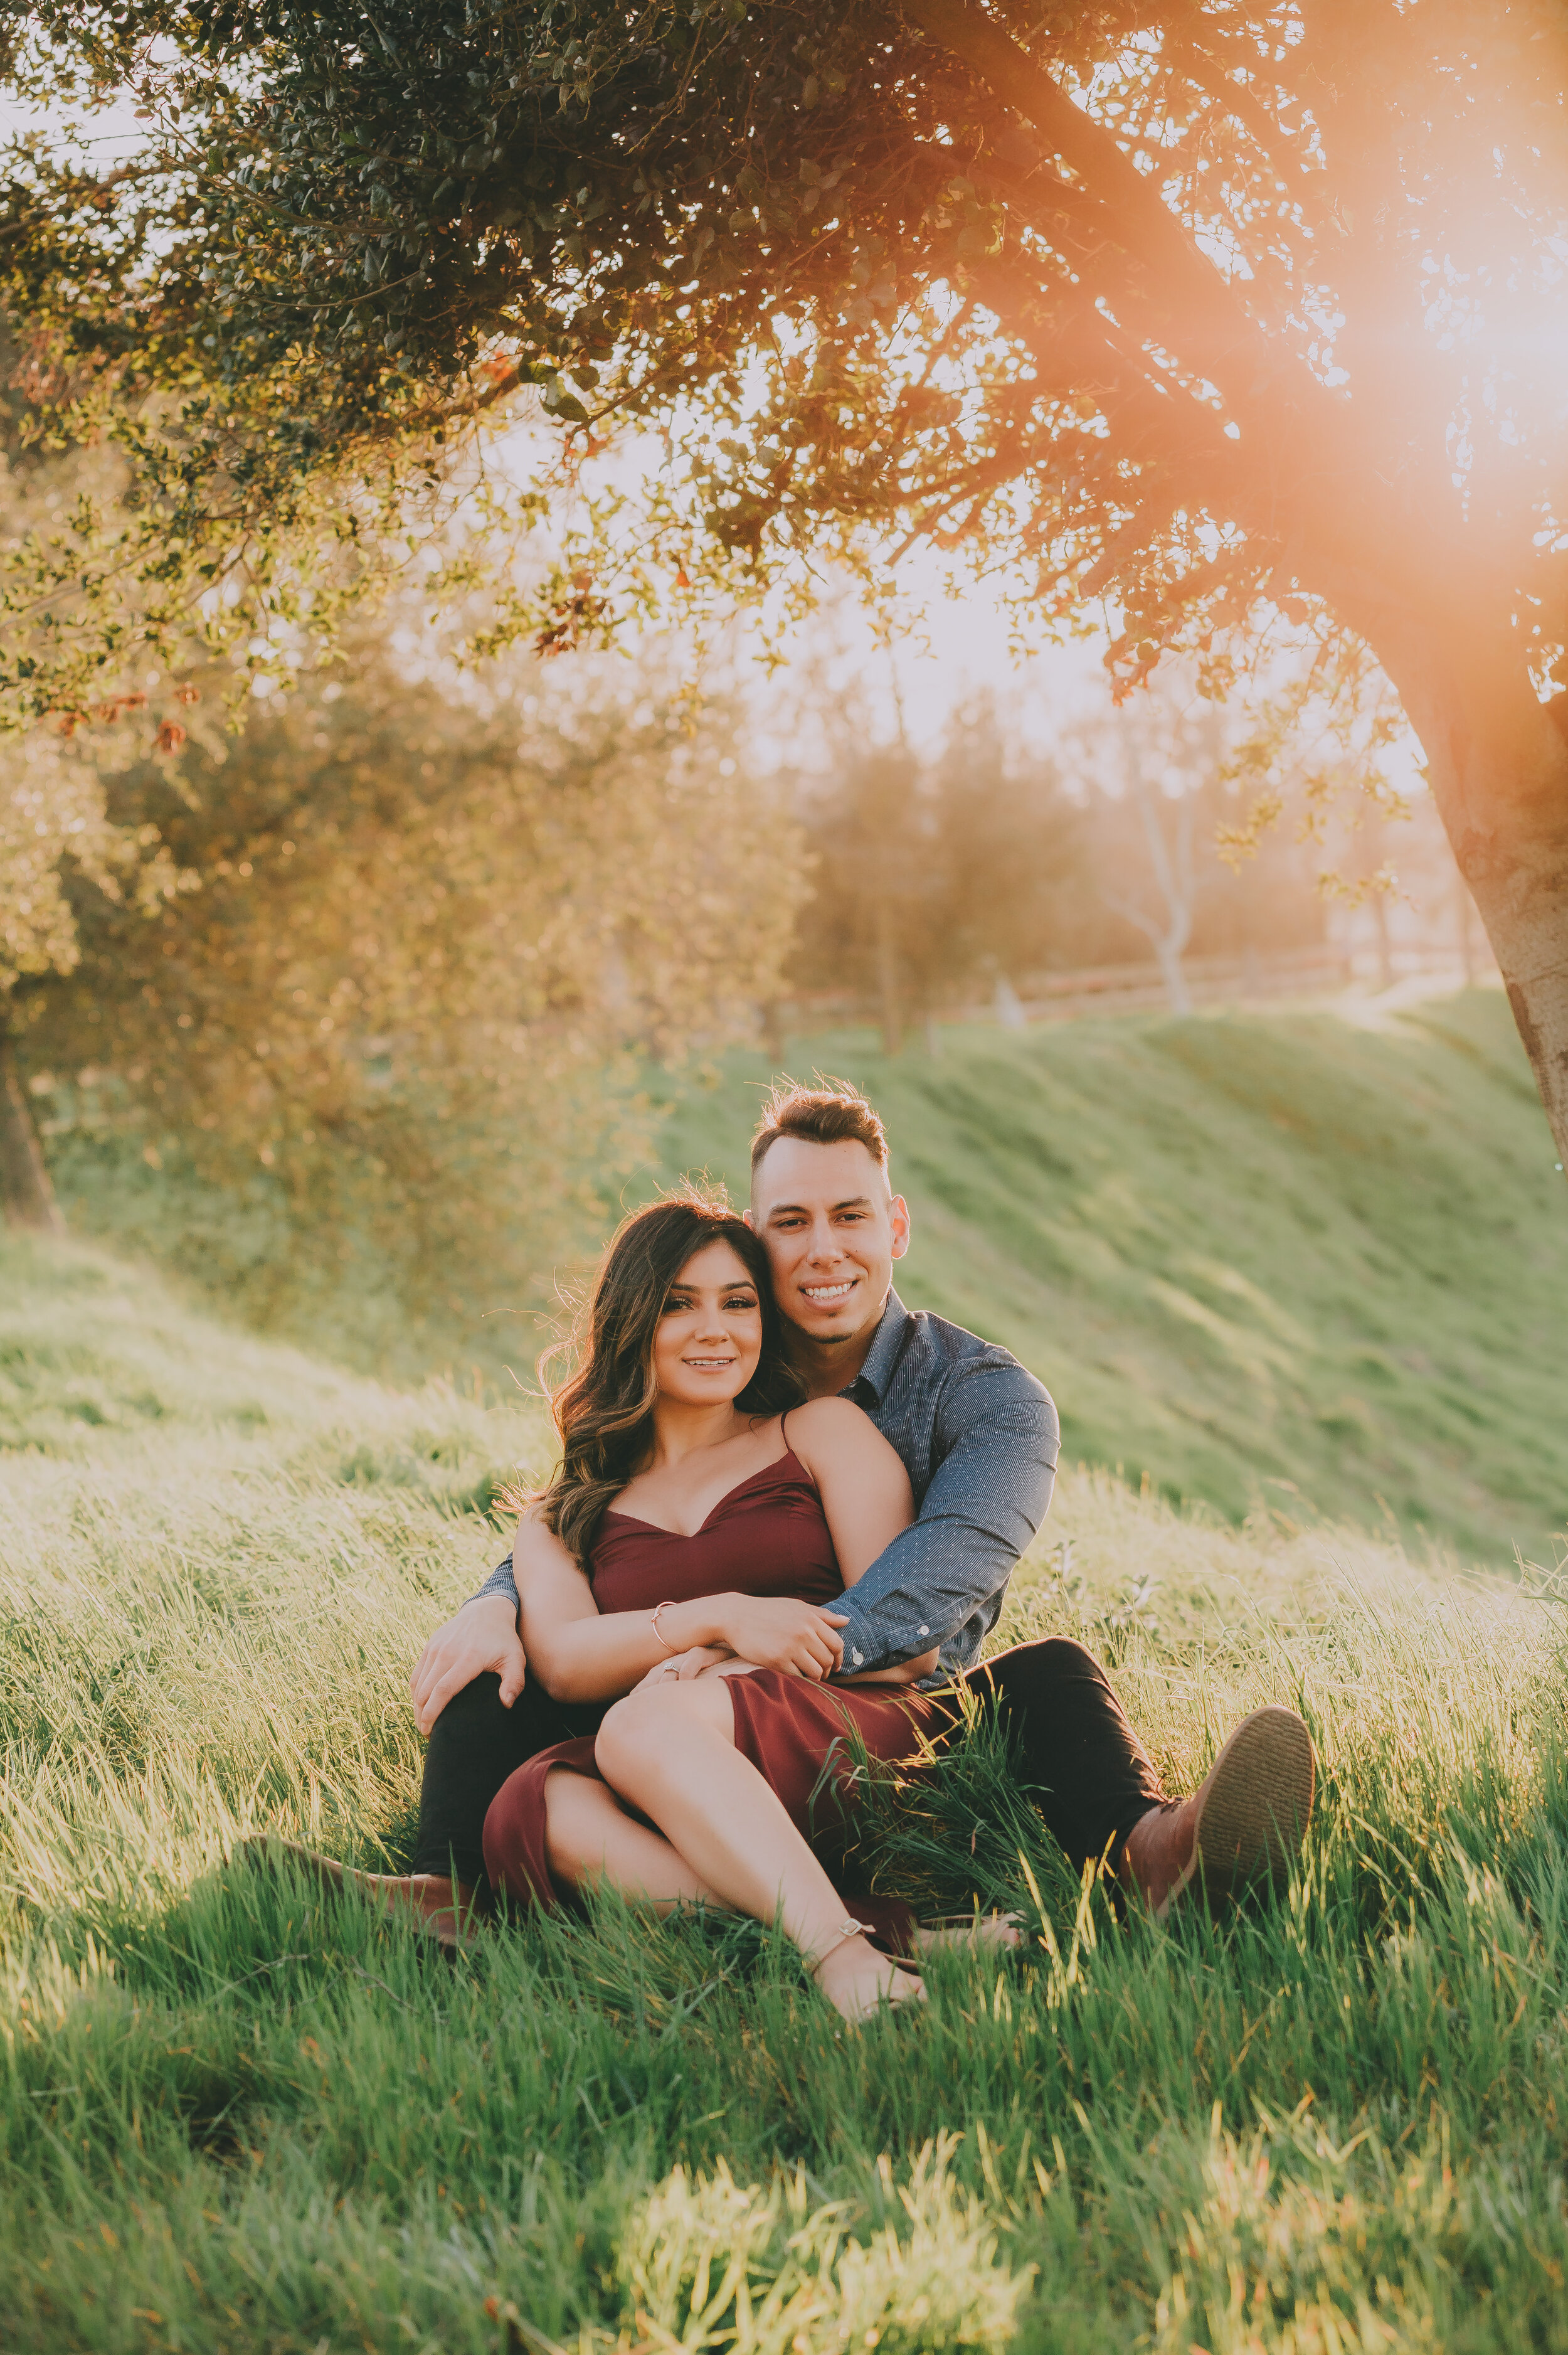 Fresno Engagament Photos - The Clausen Gallery - Samantha and Jesus-24.jpg